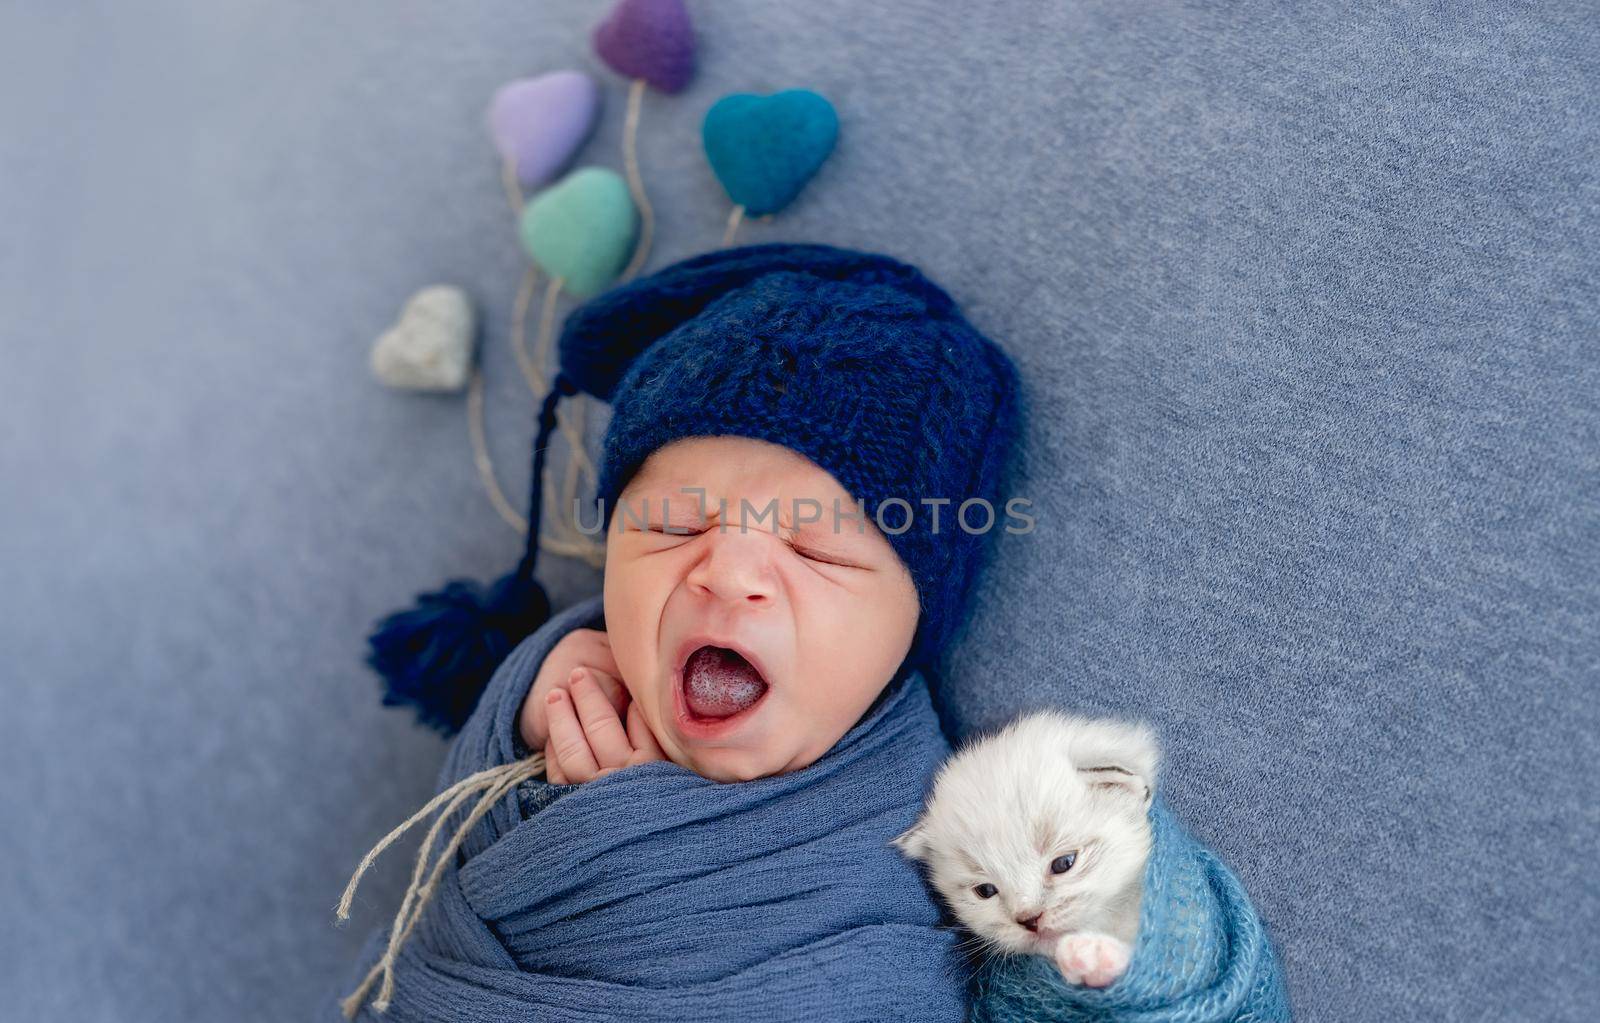 Newborn baby boy swaddled in blue fabric and wearing hat sleeping with small fluffy white kitten and holding knitted toy hearts. Portrait of yawning infant kid with little cat